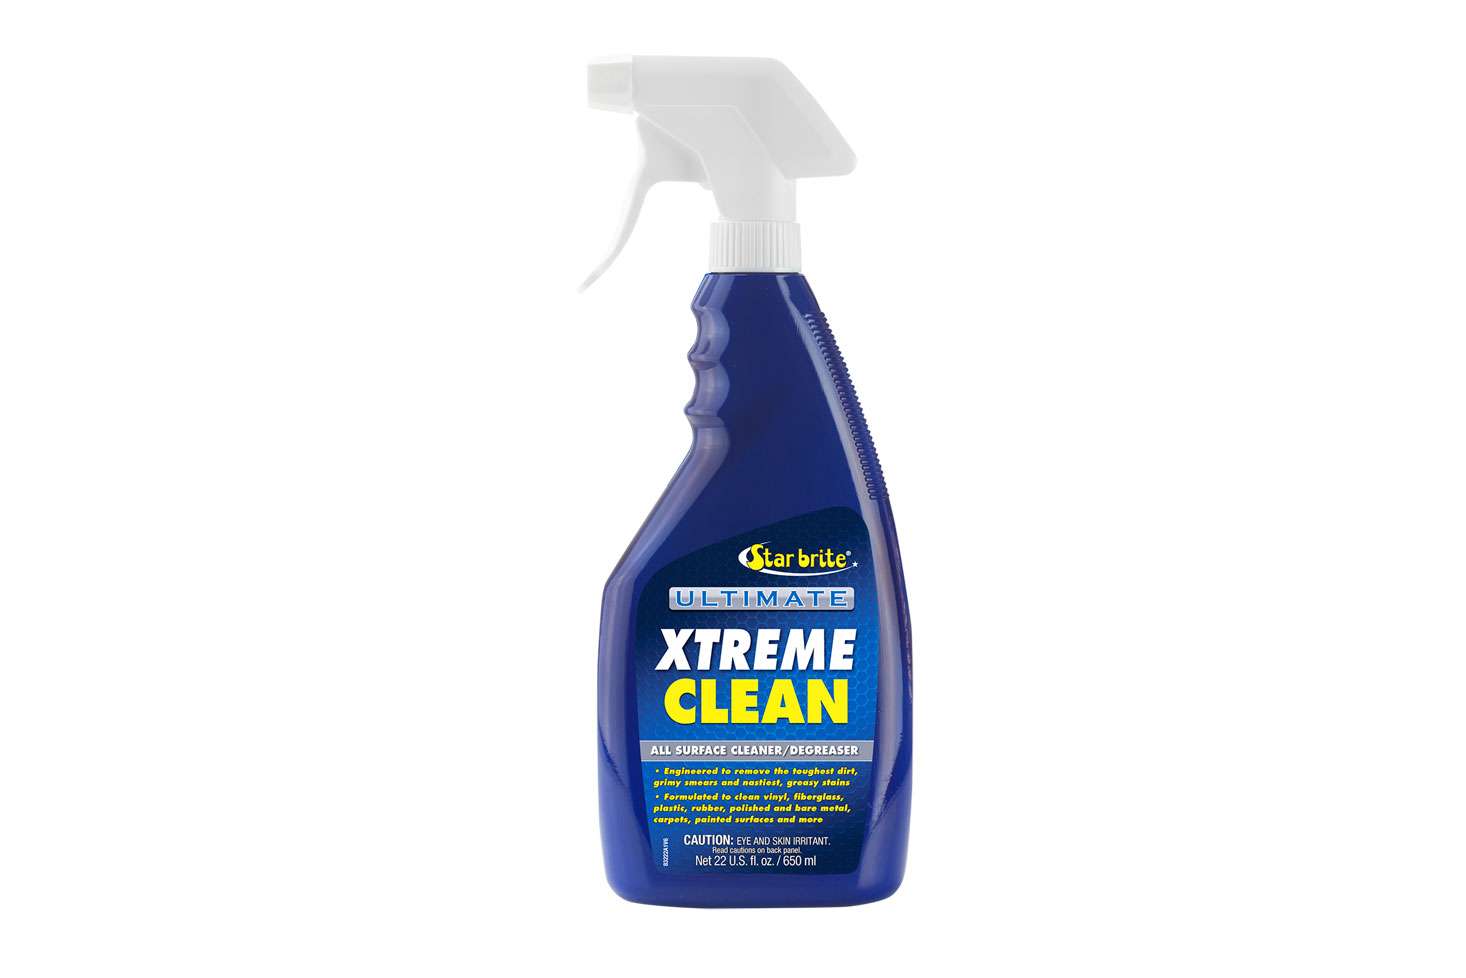 <p><b>Star brite Ultimate Xtreme Clean  </b></p>
Instead of another pair of socks, hereâs a Stocking Stuffer theyâll love! Star brite's Ultimate Xtreme Clean is an all-purpose, all-surface cleaner/degreaser. The special chelating agents attack grime or stains on your boat, truck, ATV, trailers, tools and most other surfaces. </p>

<p>The cleaner is formulated with special chelating agents that attack road grime, fish blood, bug bits, dried mud, greasy smears and almost every other possible type of crud. Ultimate Xtreme Clean breaks the bond that holds stains and dirt to the surface so they can be wiped away without heavy scrubbing. However, it does not contain caustic, dangerous chemicals that can damage the finish. Xtreme Clean can be used on boat wraps, metal, fiberglass, plastic, chrome, stainless and rubber surfaces. The phosphate-free, biodegradable formula means you can use it on or near the water. Available in 22-, 32-ounce and 1-gallon sizes at most major marine retailers and online merchants. <br>
<p><b>MSRP $13.49 (22-ounce) </b></p>
<a href=